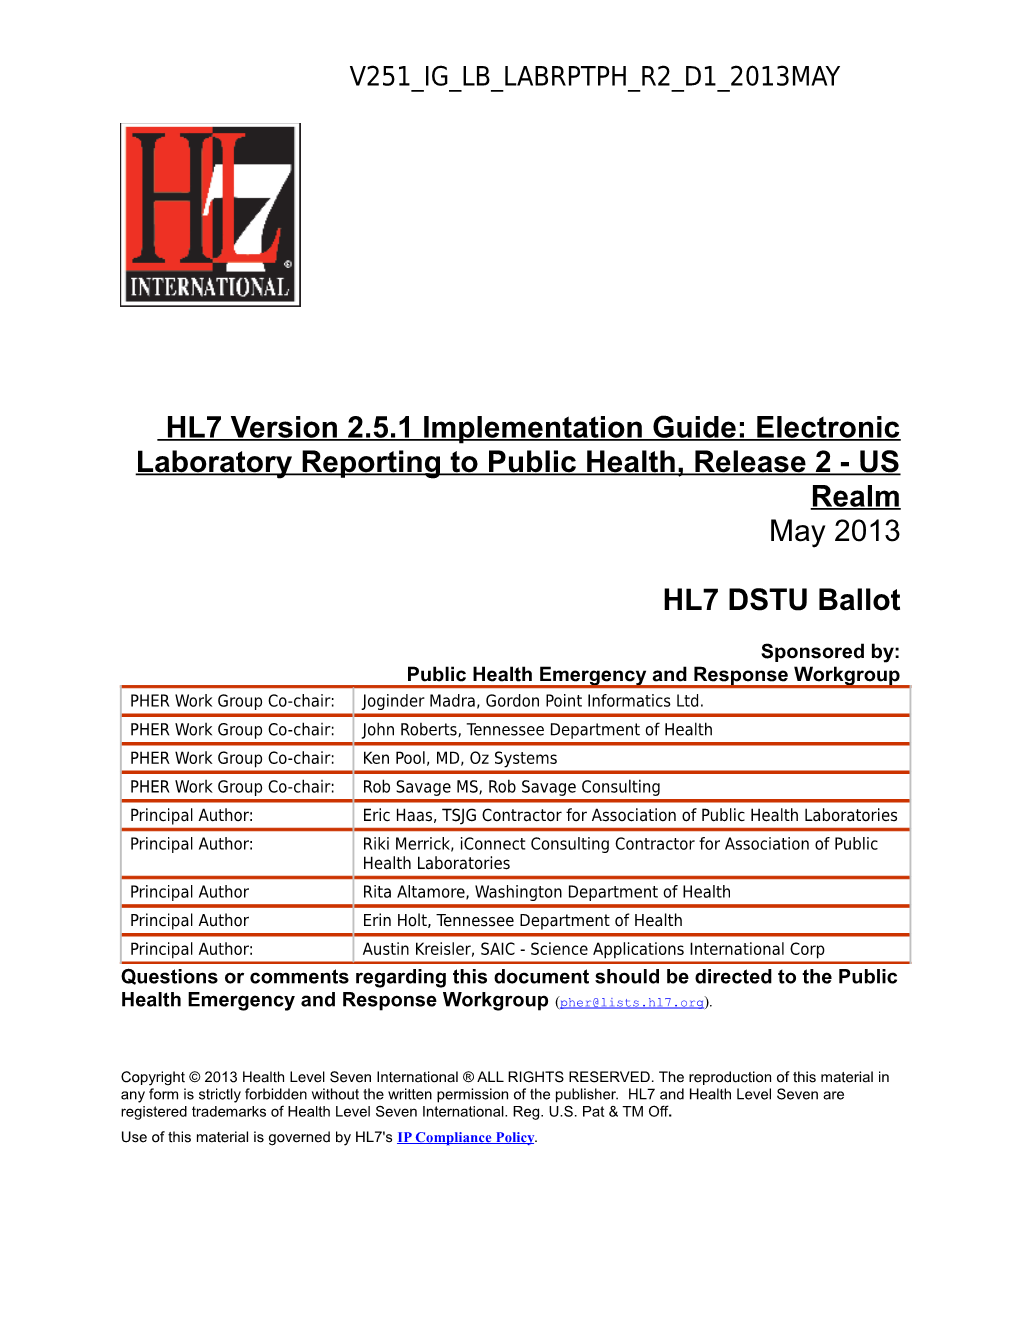 HL7 Version 2.5.1 Implementation Guide: Electronic Laboratory Reporting to Public Health